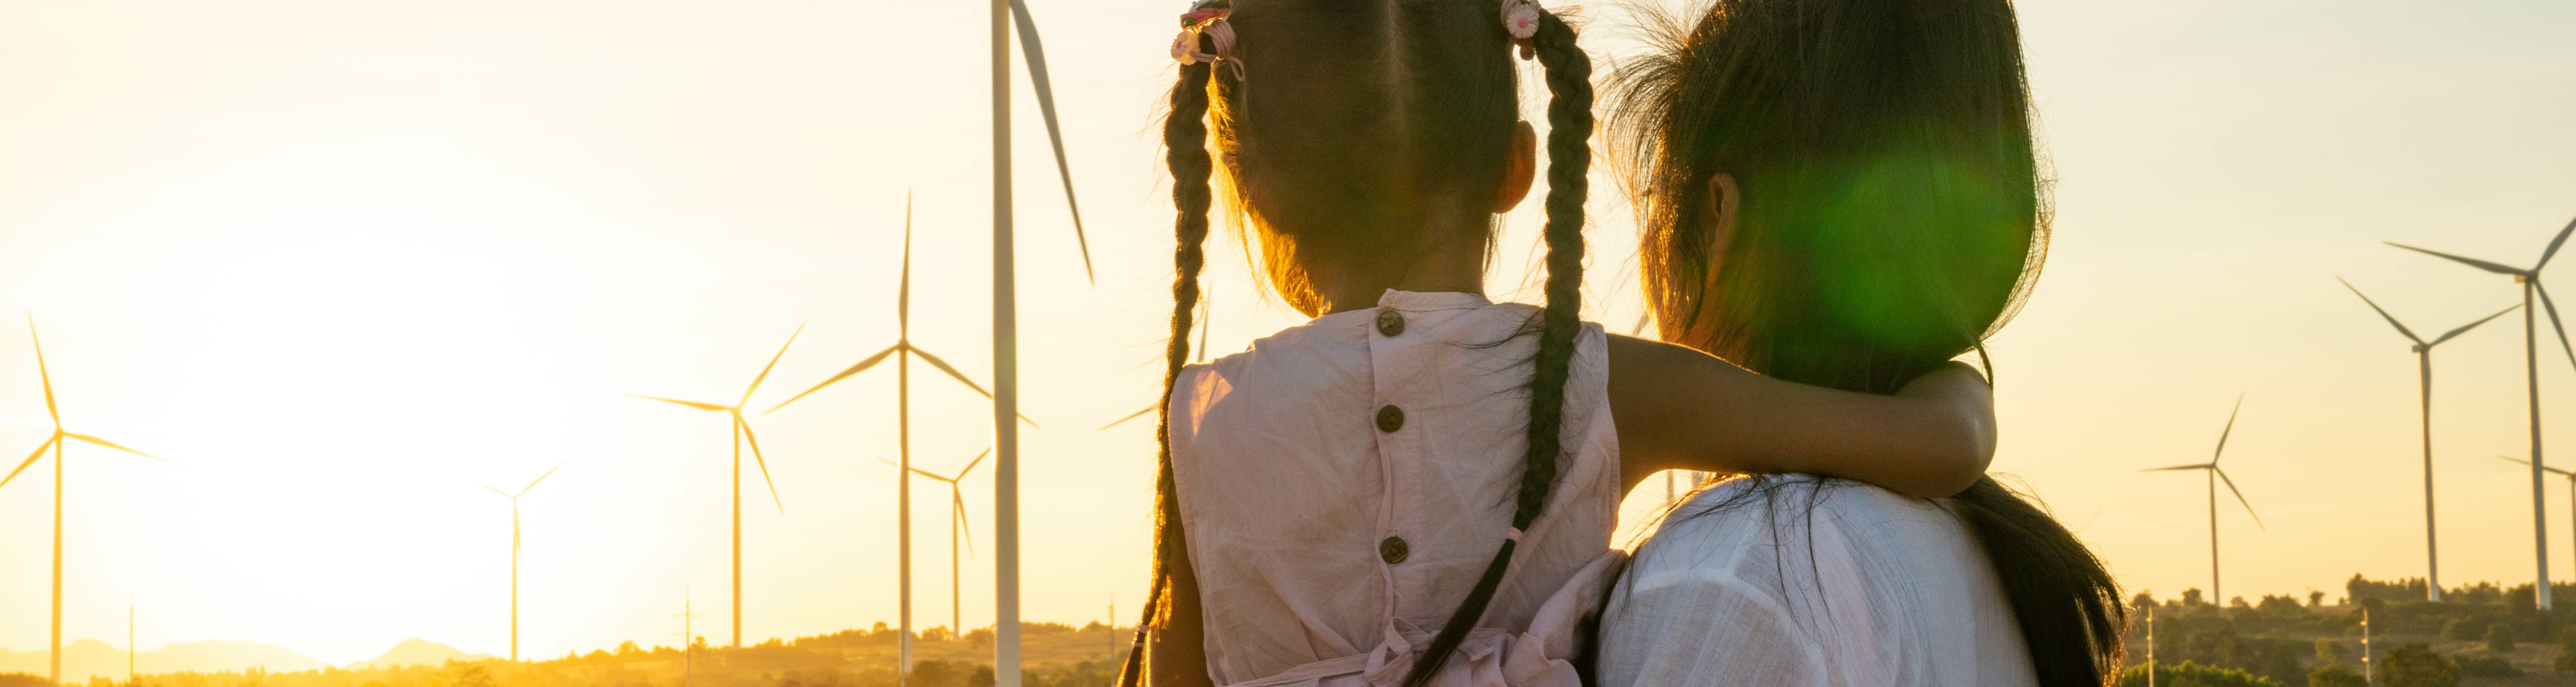 A woman holding a little girl with two pigtail braids in front of wind turbines at sunset.